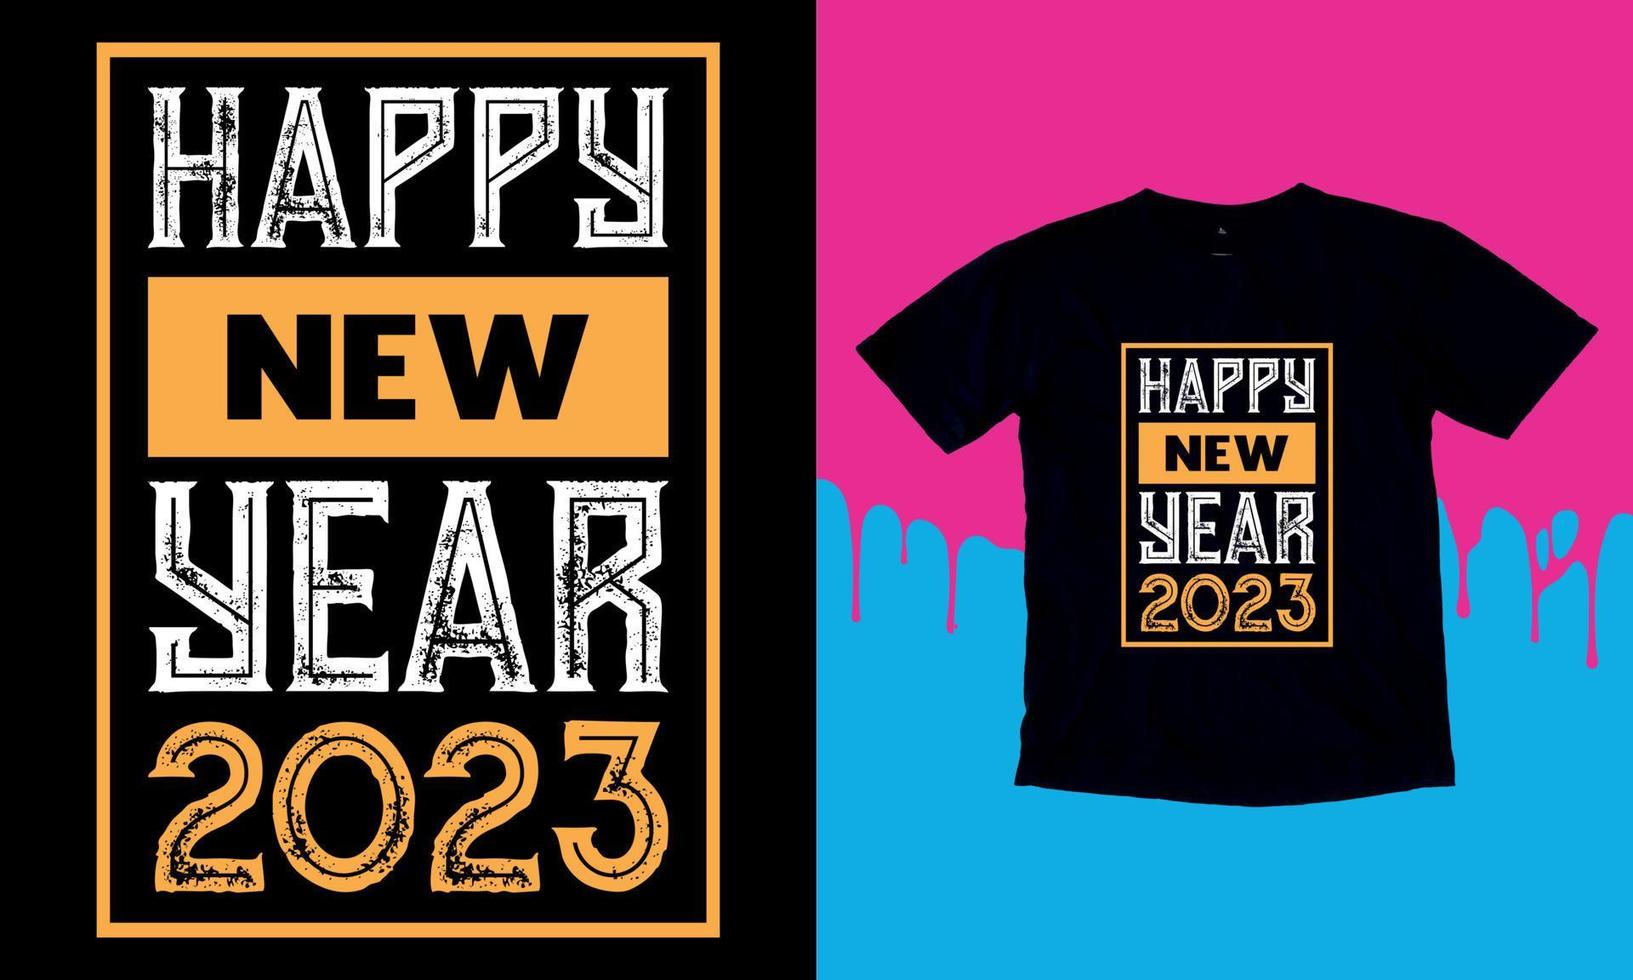 Happy New Year 2023, Happy New Year t shirt Design, lettering vector illustration isolated on Black background, New Year Stickers Quotas, bag, cups, card, gift.